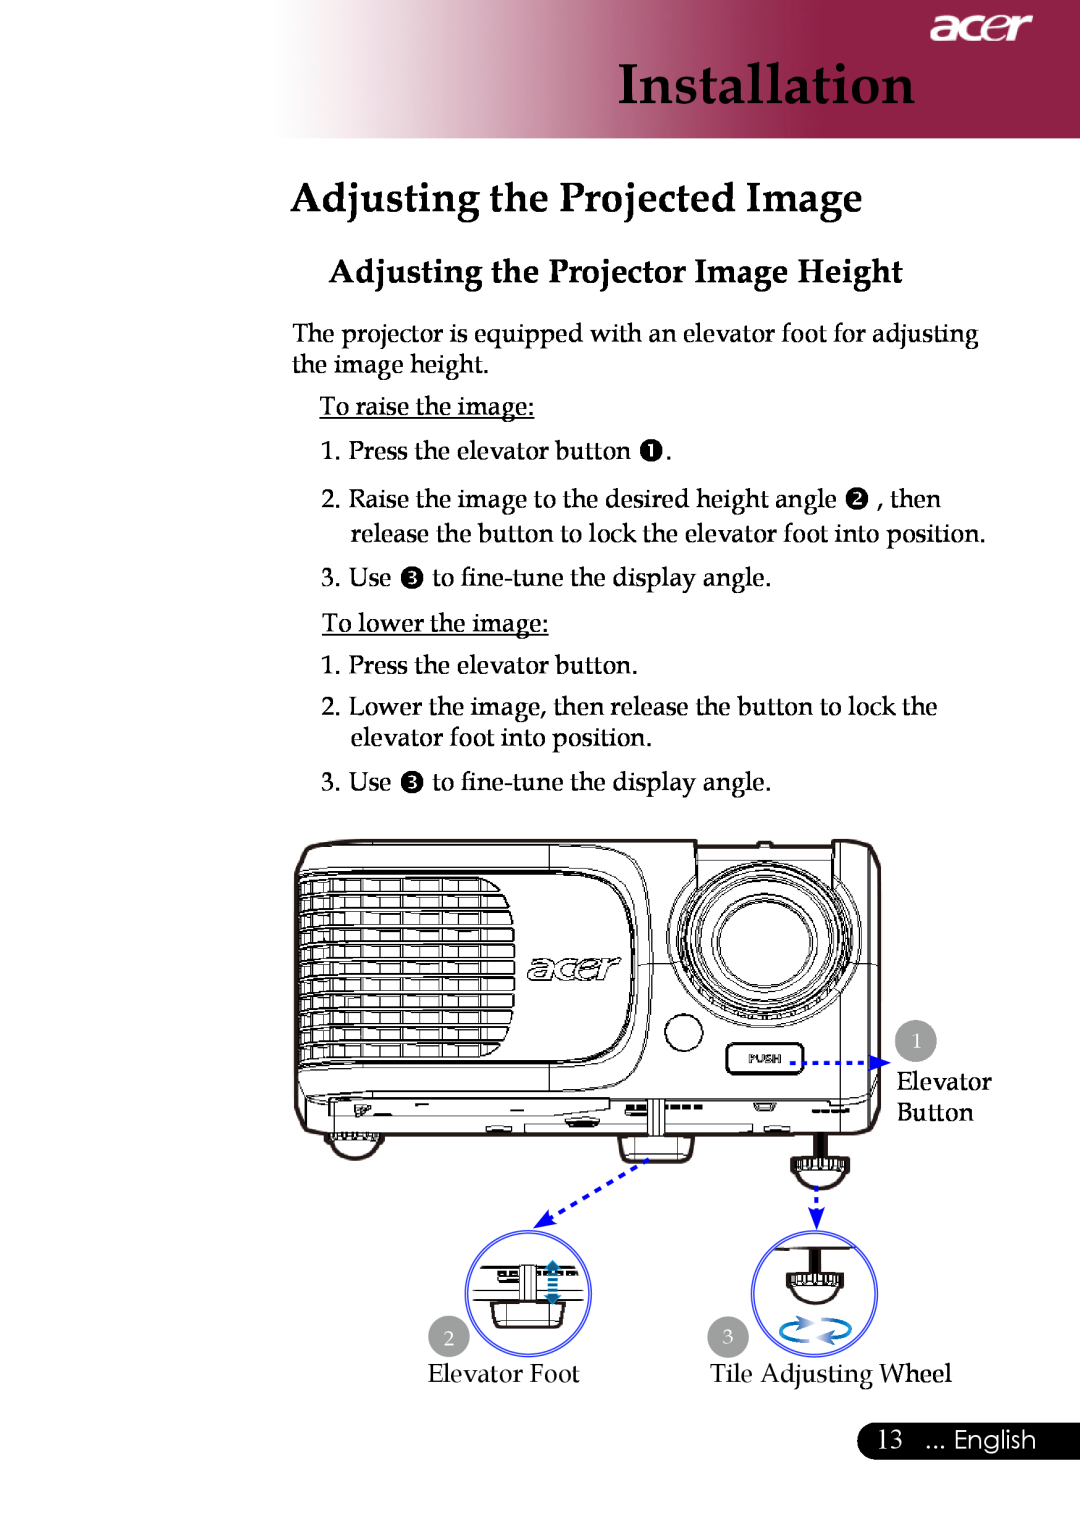 Acer XD1280 Adjusting the Projected Image, Adjusting the Projector Image Height, Elevator Foot, English, Installation 